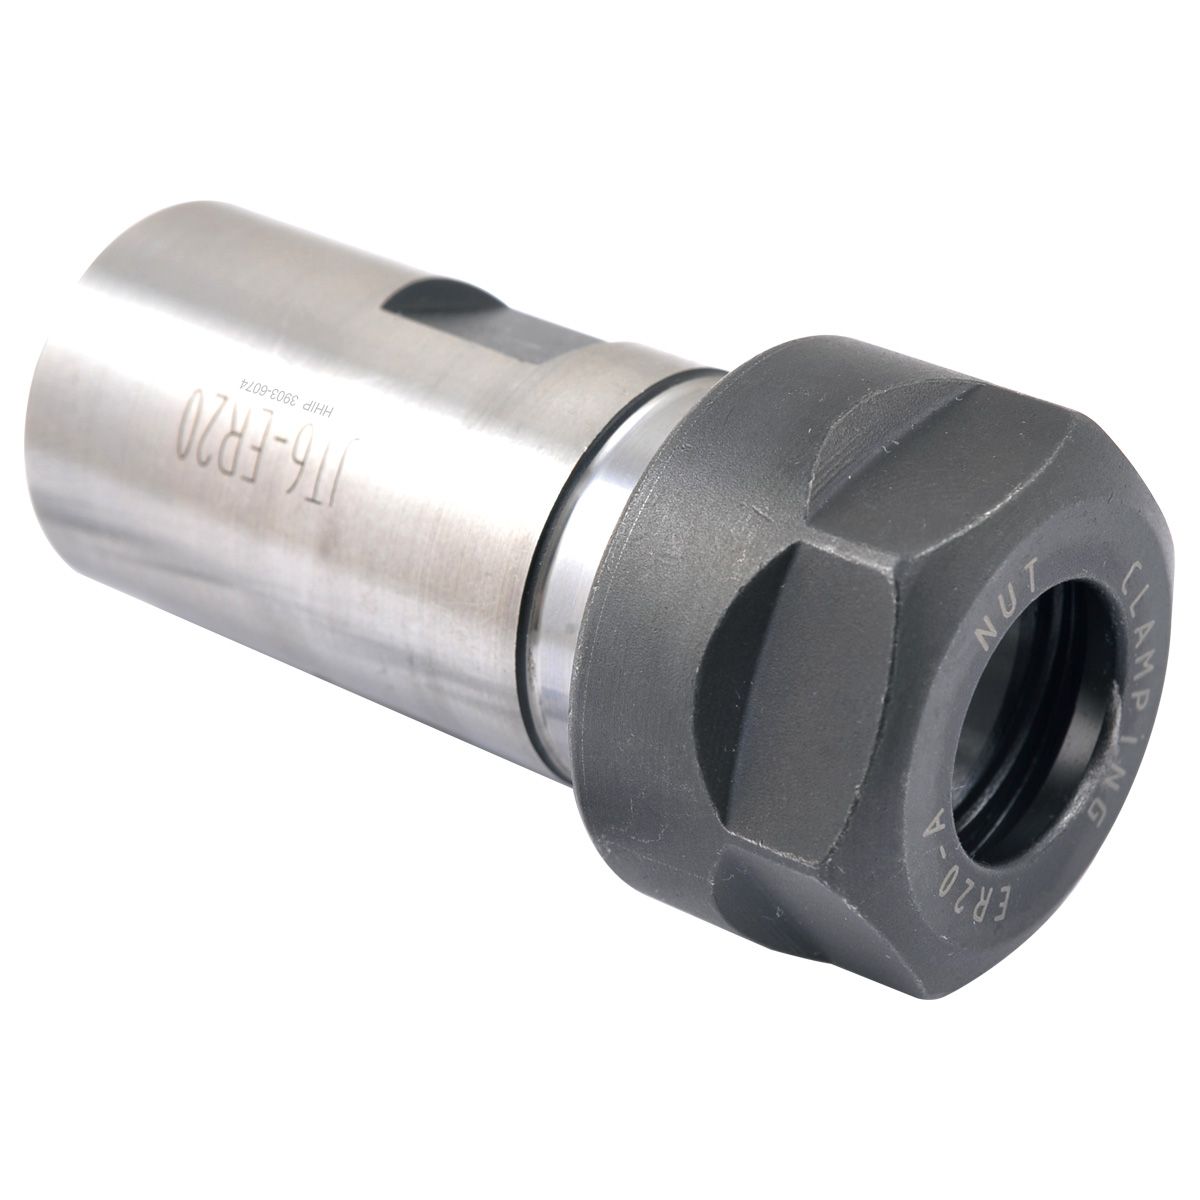 ER20 COLLET & DRILL CHUCK WITH JT6 SLEEVE (3903-6074)